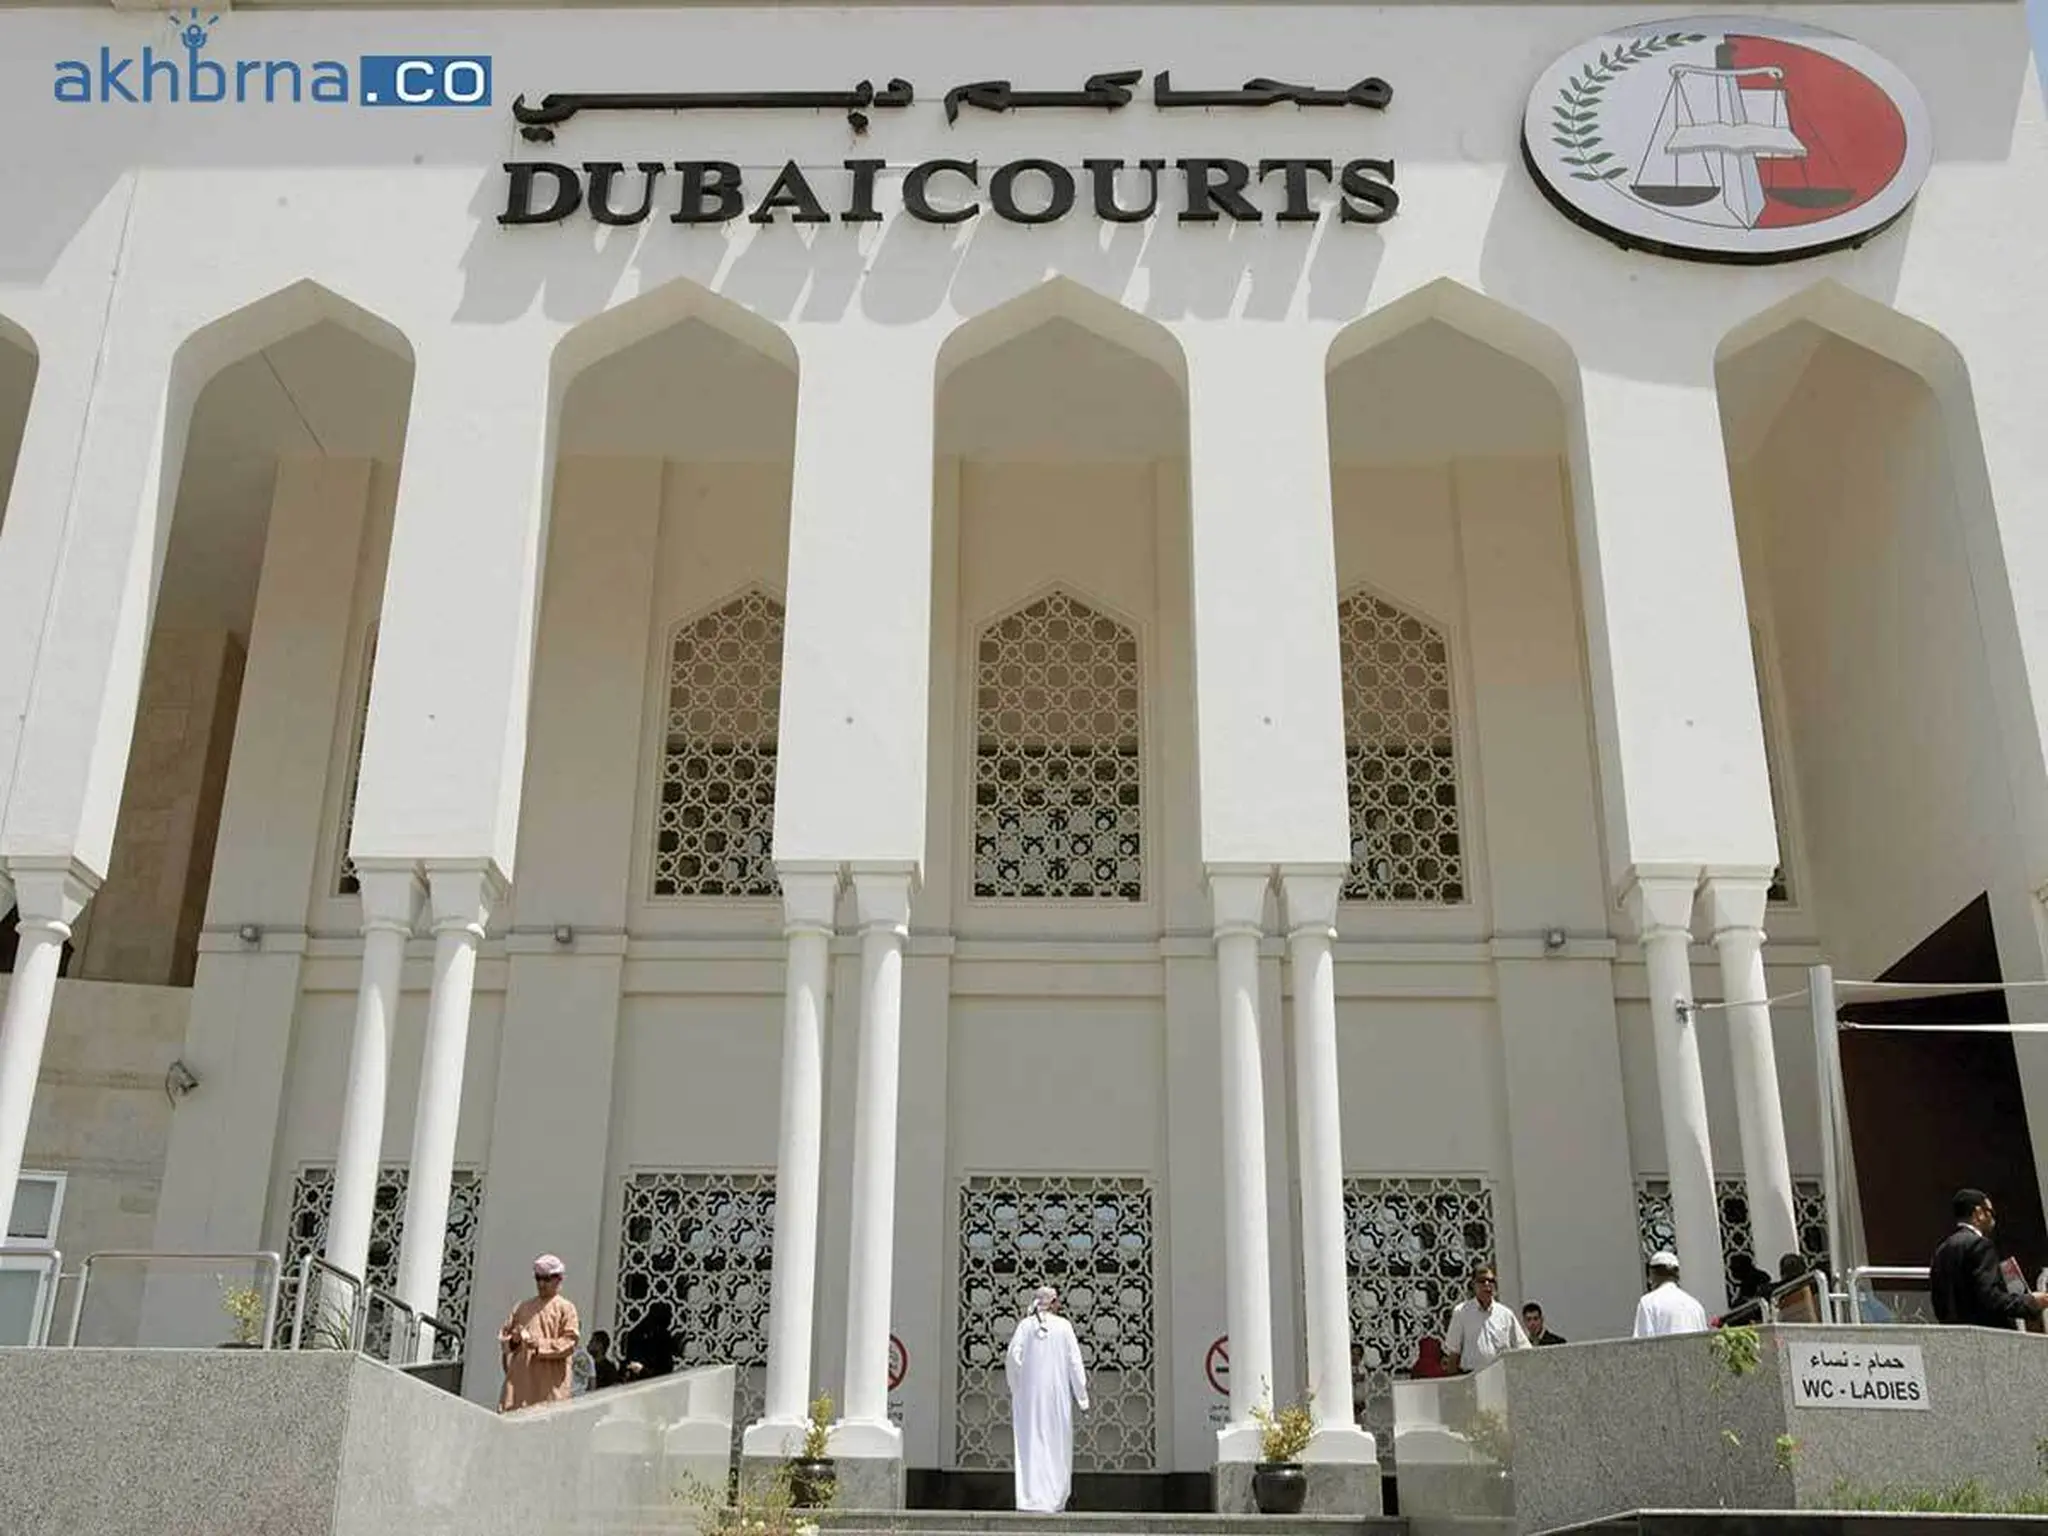 UAE: Asian expat ordered to pay 141,600 dirhams in compensation to an Arab woman